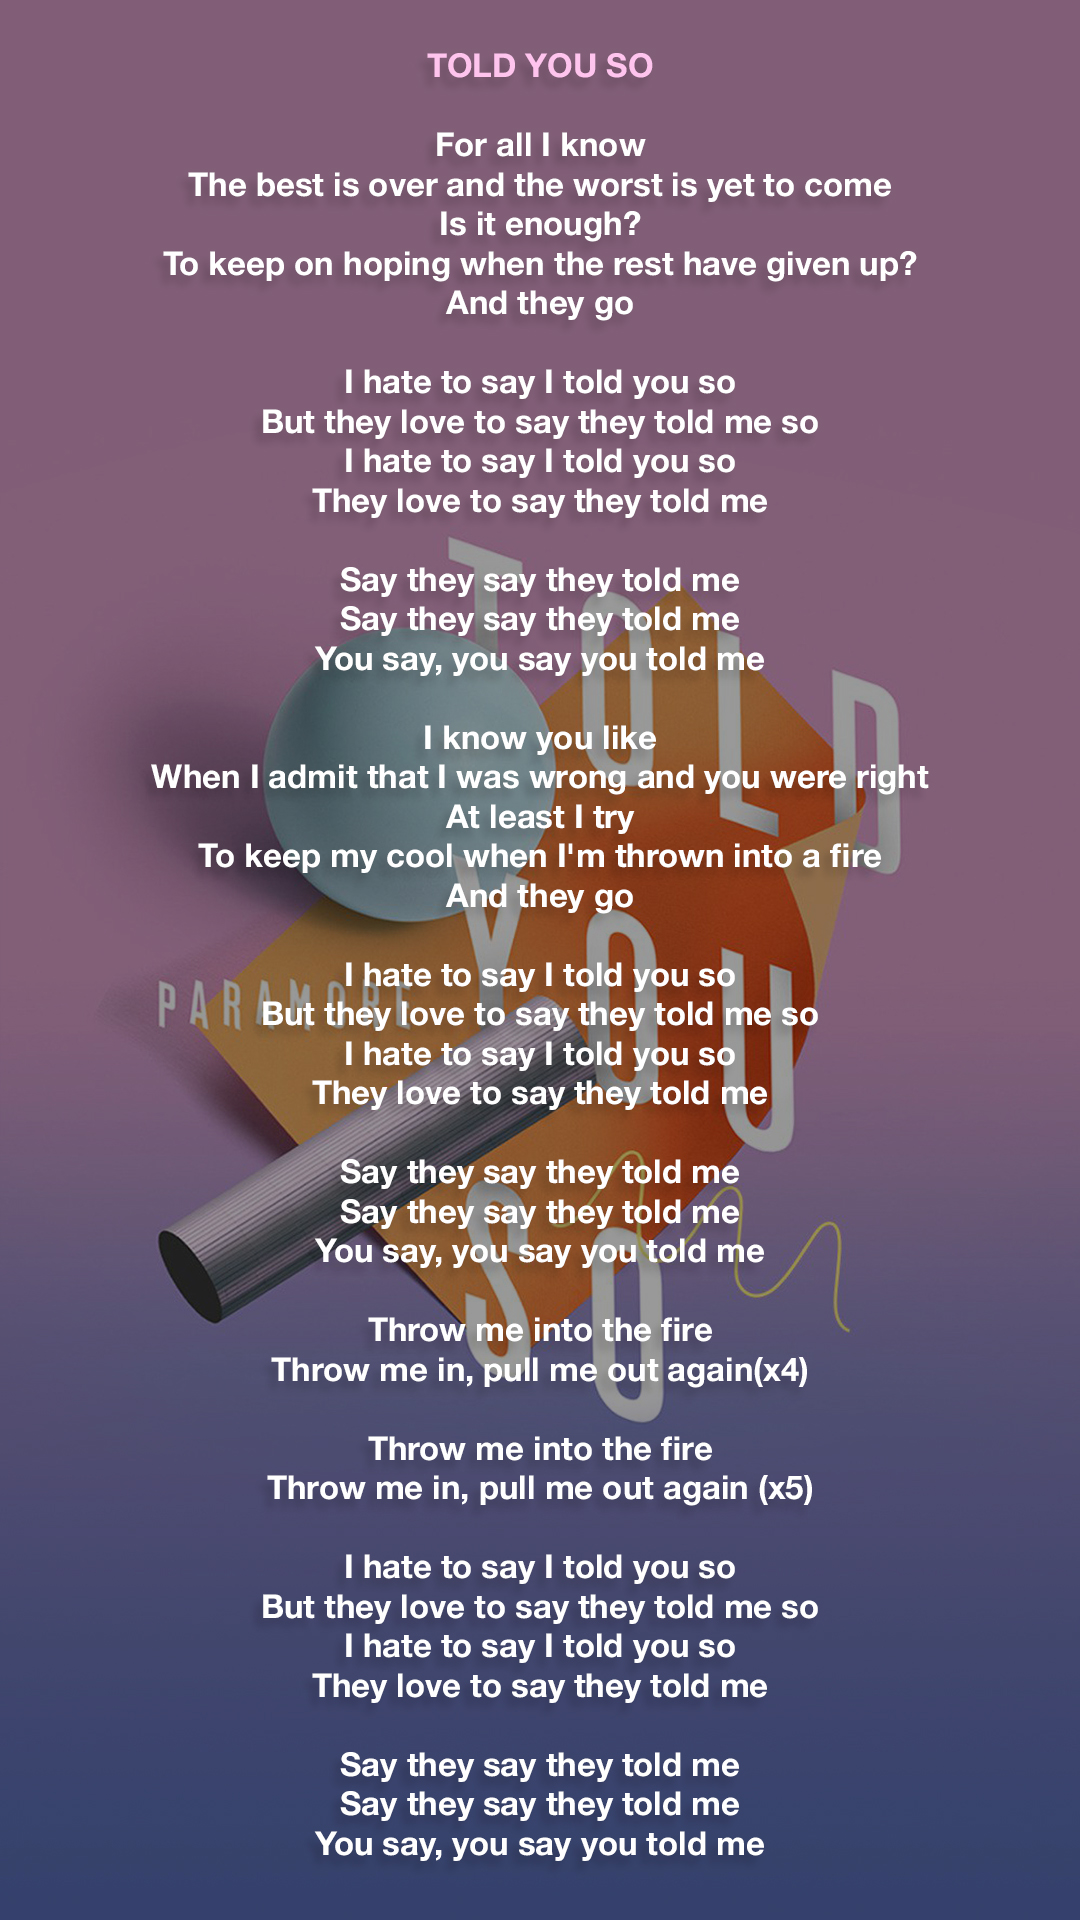 TOLD YOU SO - Paramore - After Laughter LYRICS by alanrius on